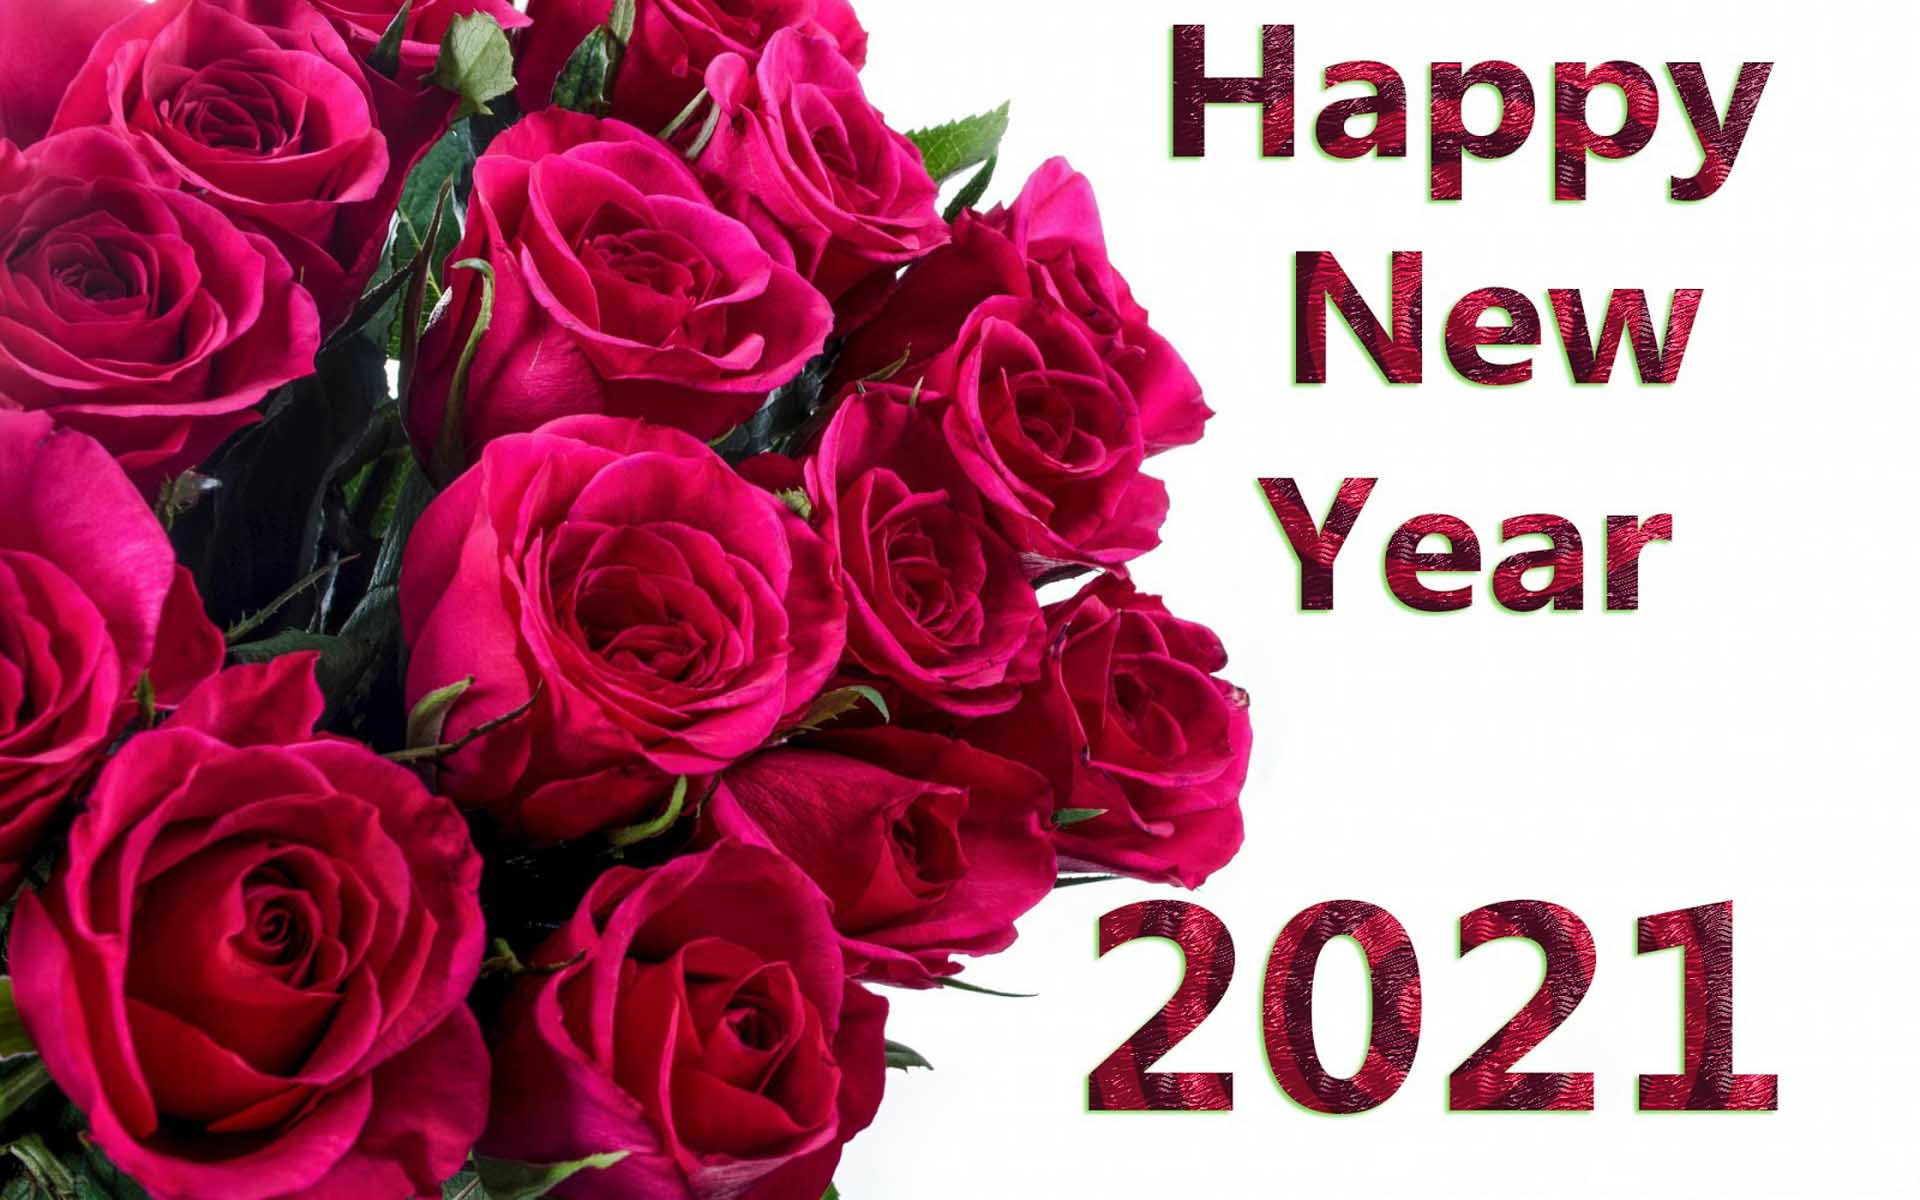 Happy New Year 2021 Red Roses Wallpaper HD High Quality 1920x1200, Wallpaper13.com